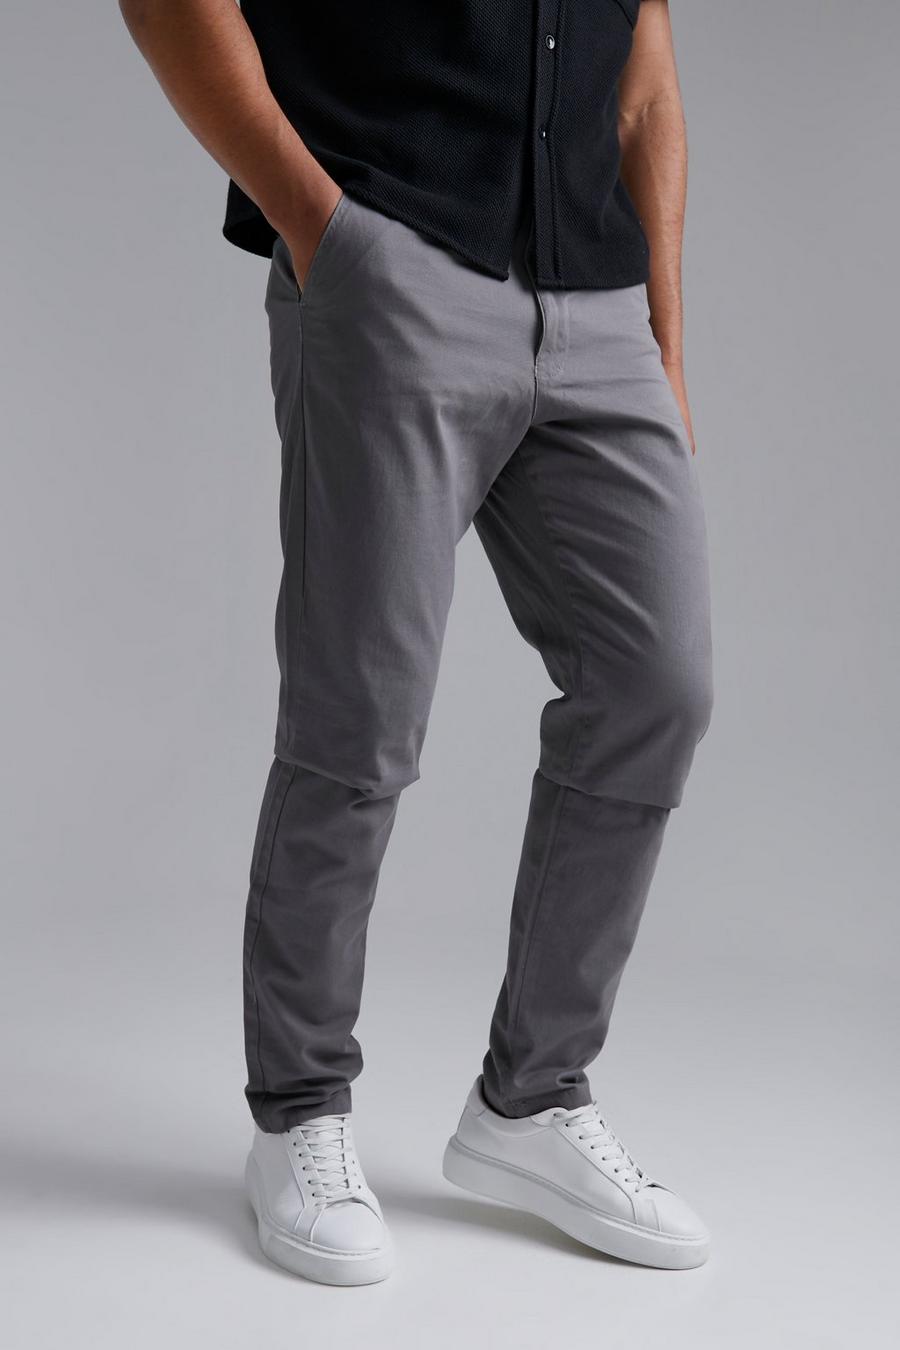 Charcoal gris Tall Slim Fit Chino Broek image number 1